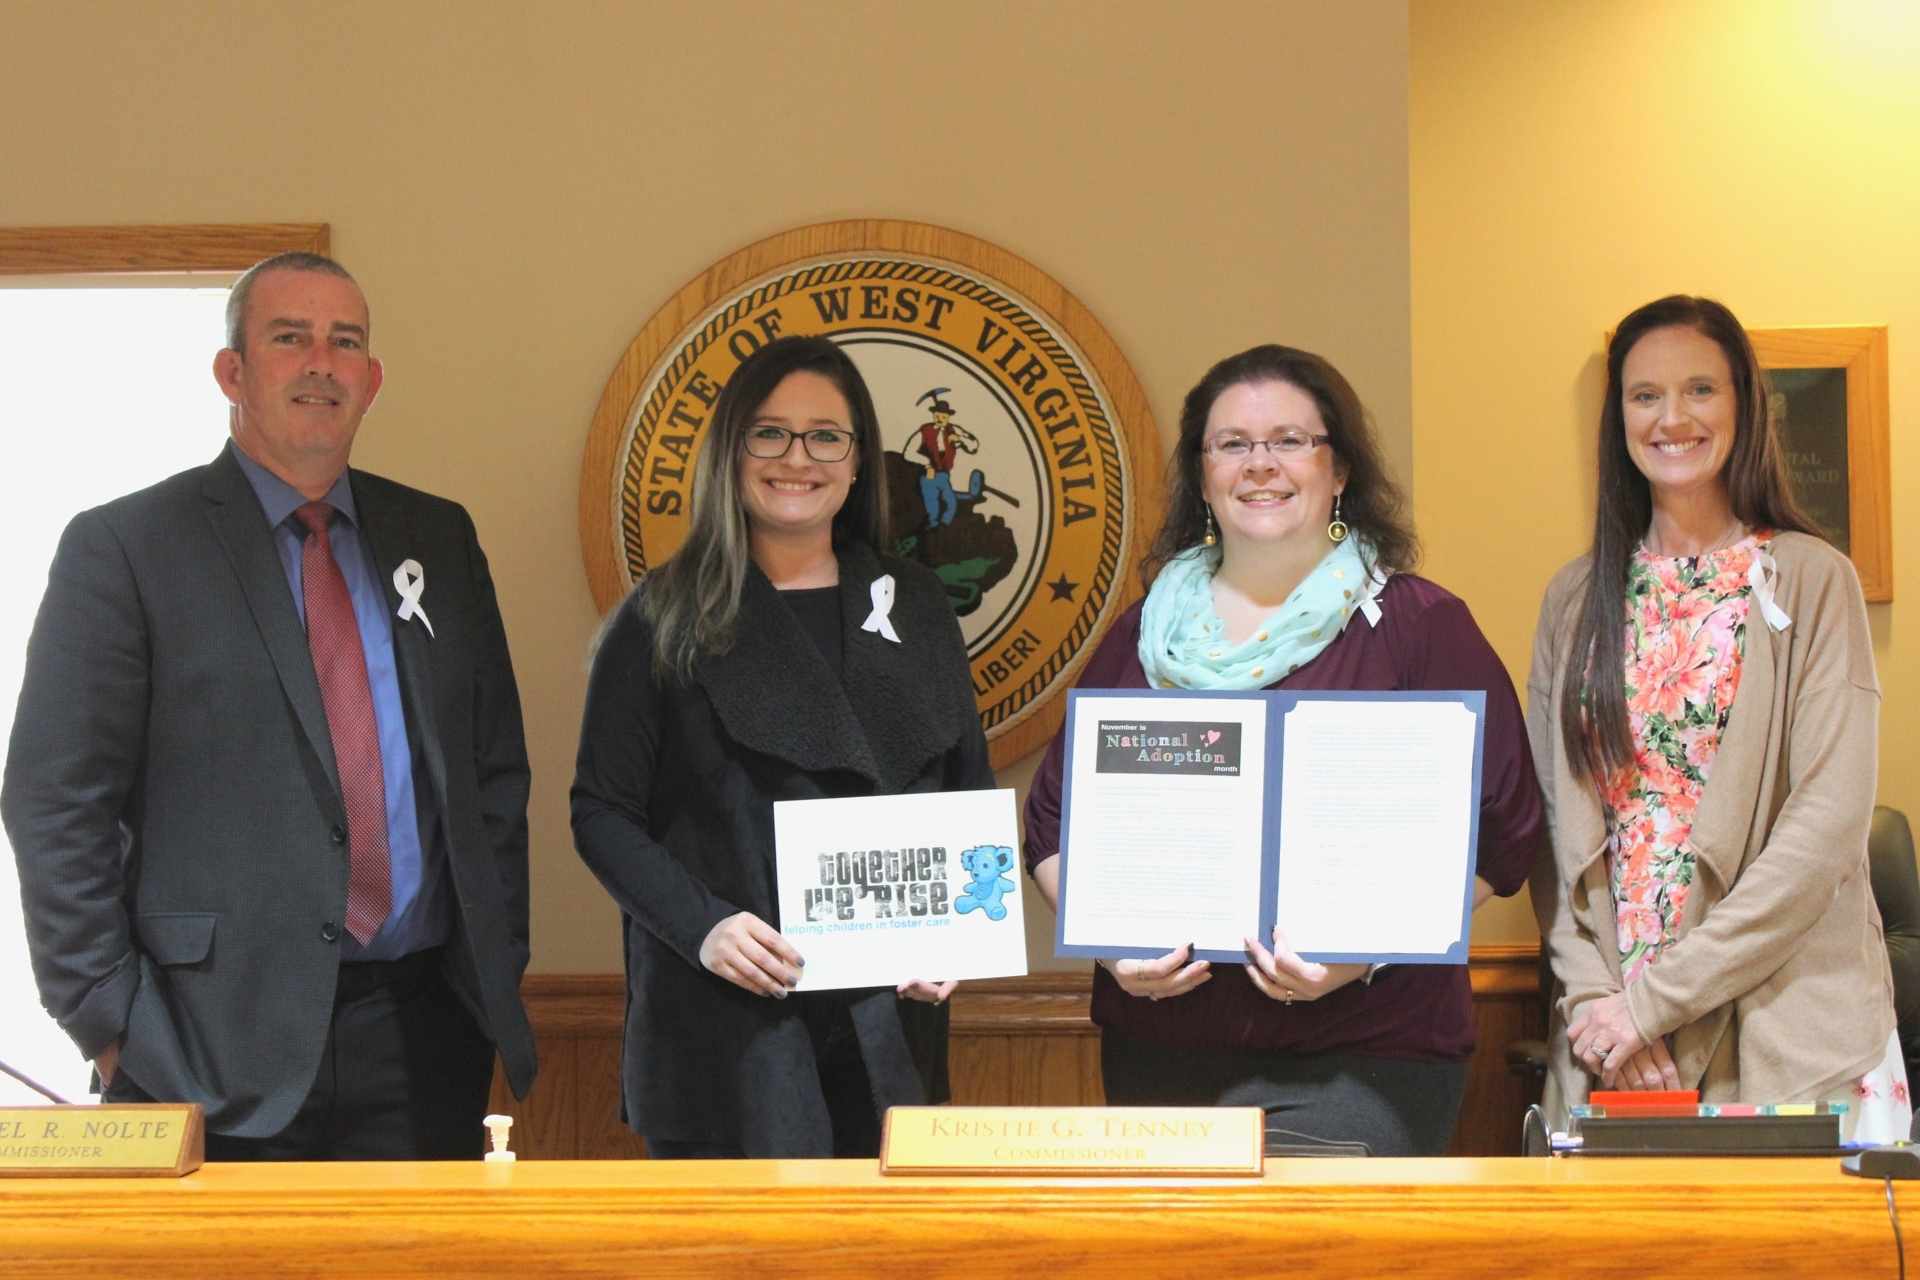 Pictured, from left, are Sam Nolte, Leah Smith Foster, Lori Ulderich-Harvey and Kristie Tenney.